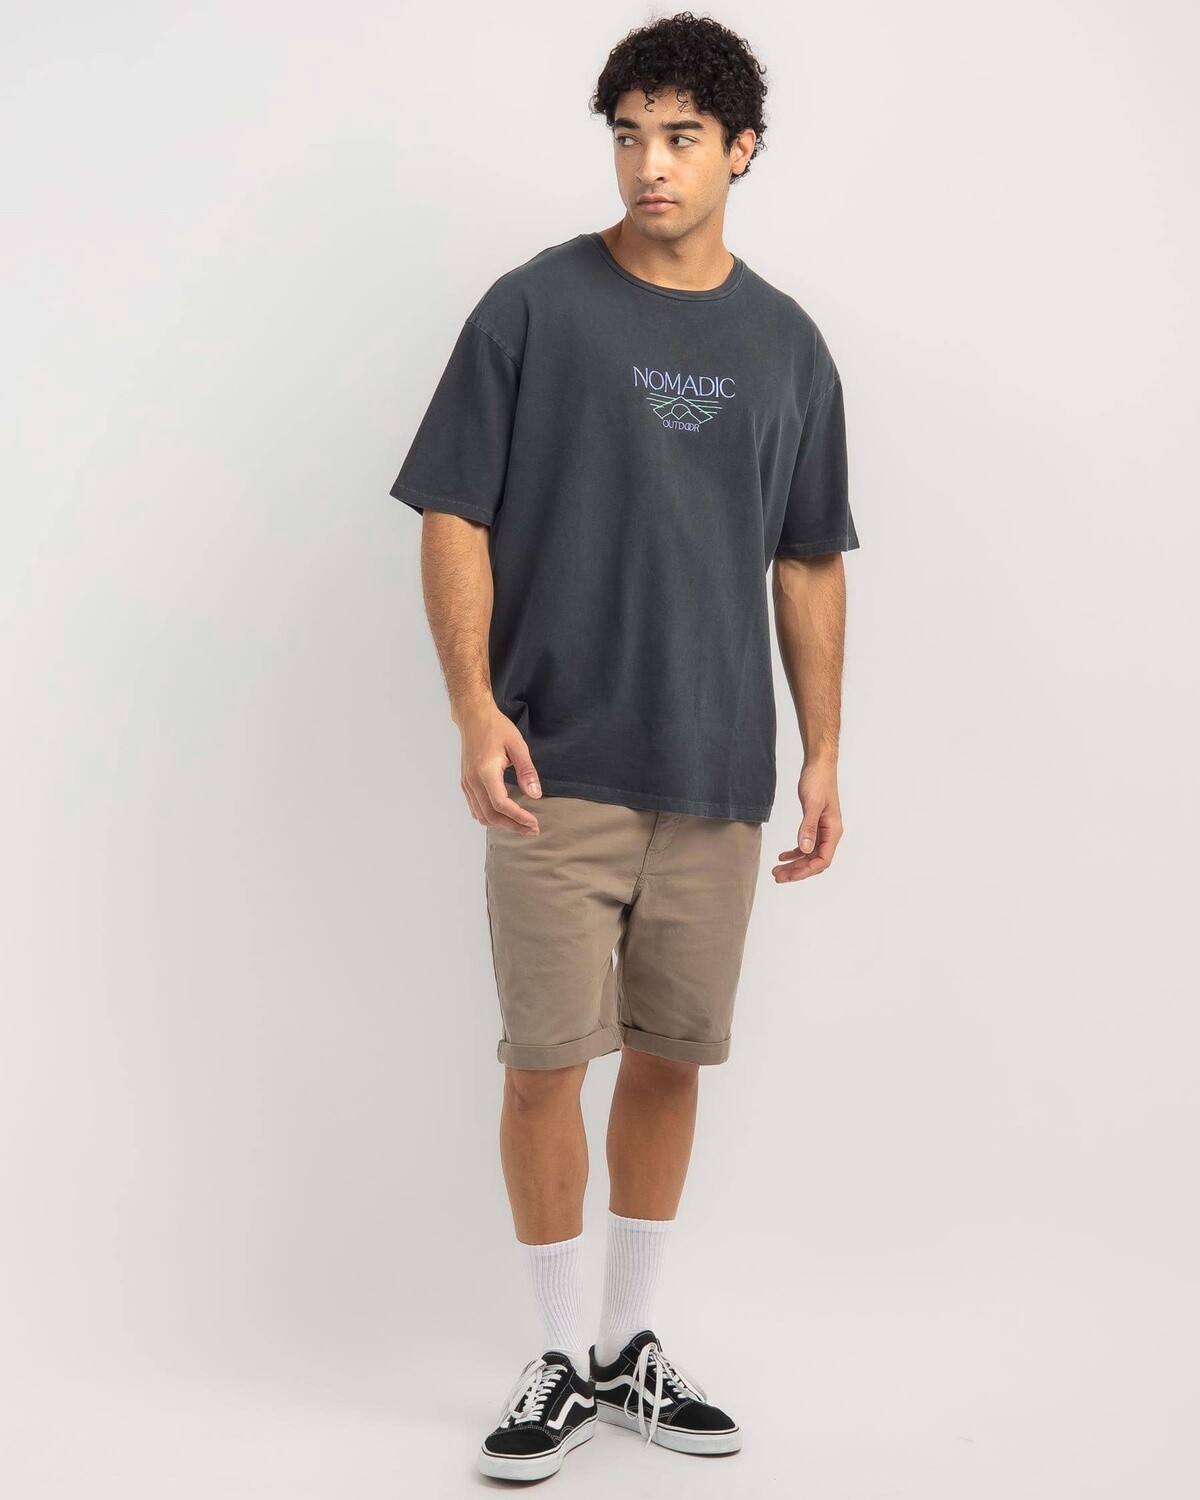 SOUTHPORT BOX FIT TEE - PIGMENT ANTHRACITE BLACK